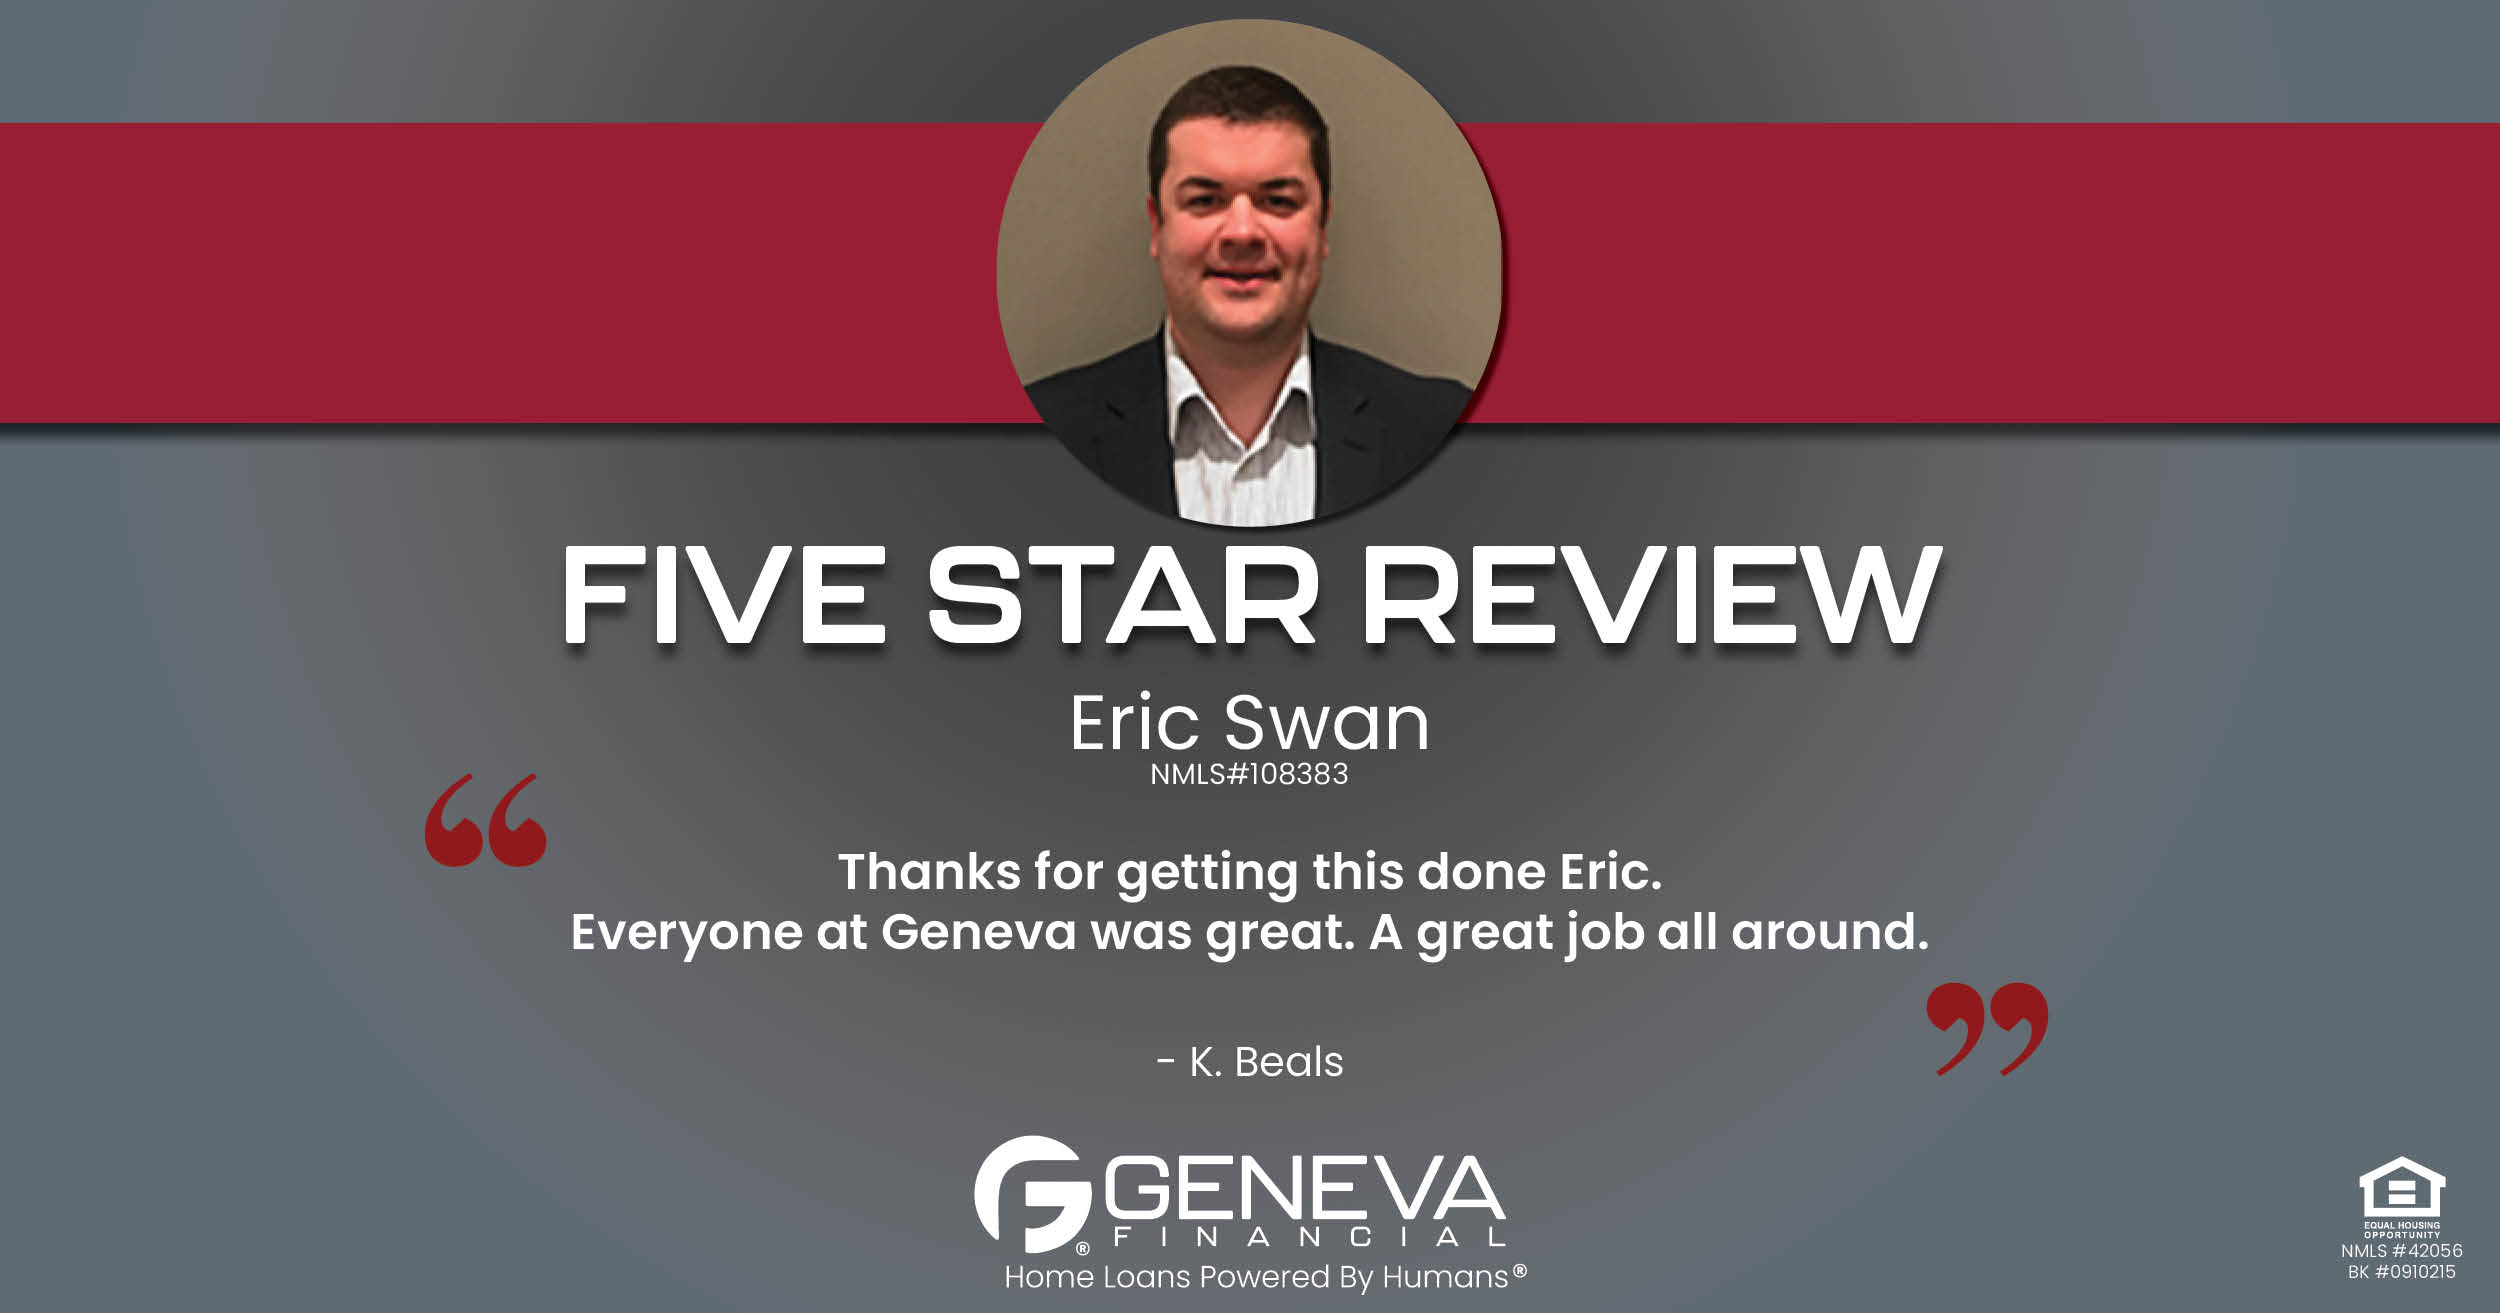 5 Star Review for Eric Swan, Licensed Mortgage Loan Officer with Geneva Financial, High Ridge, Missouri – Home Loans Powered by Humans®.